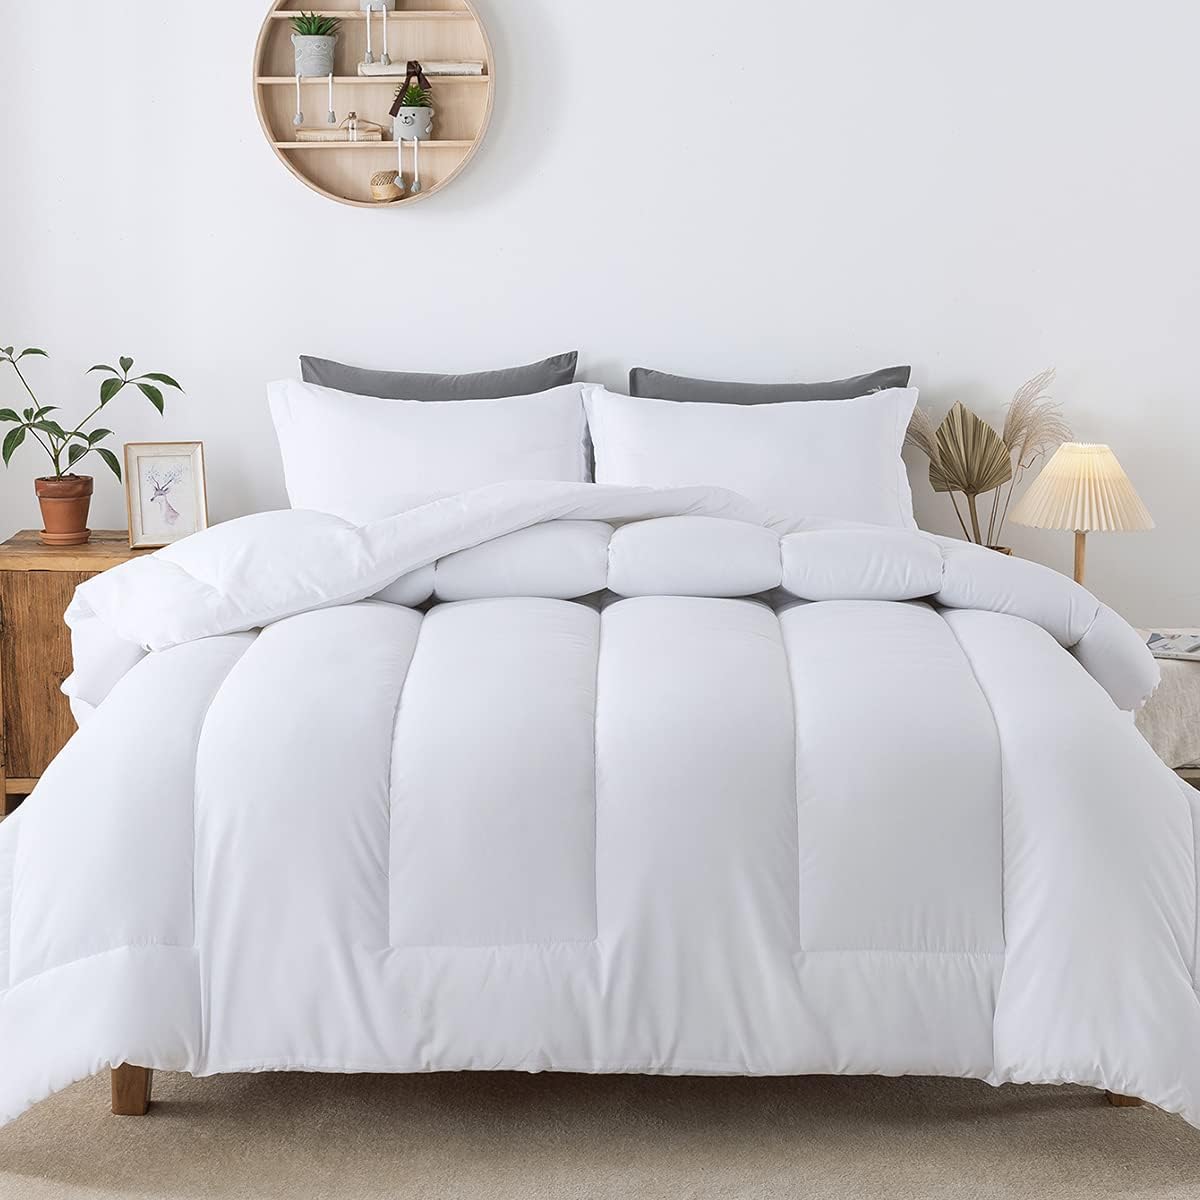 HYLEORY 3pc Comforter Set King Size with 2 Pillow Shams Machine Washable Cooling Down Alternative Bed Comforters Duvet Insert for All Season Lightweight White